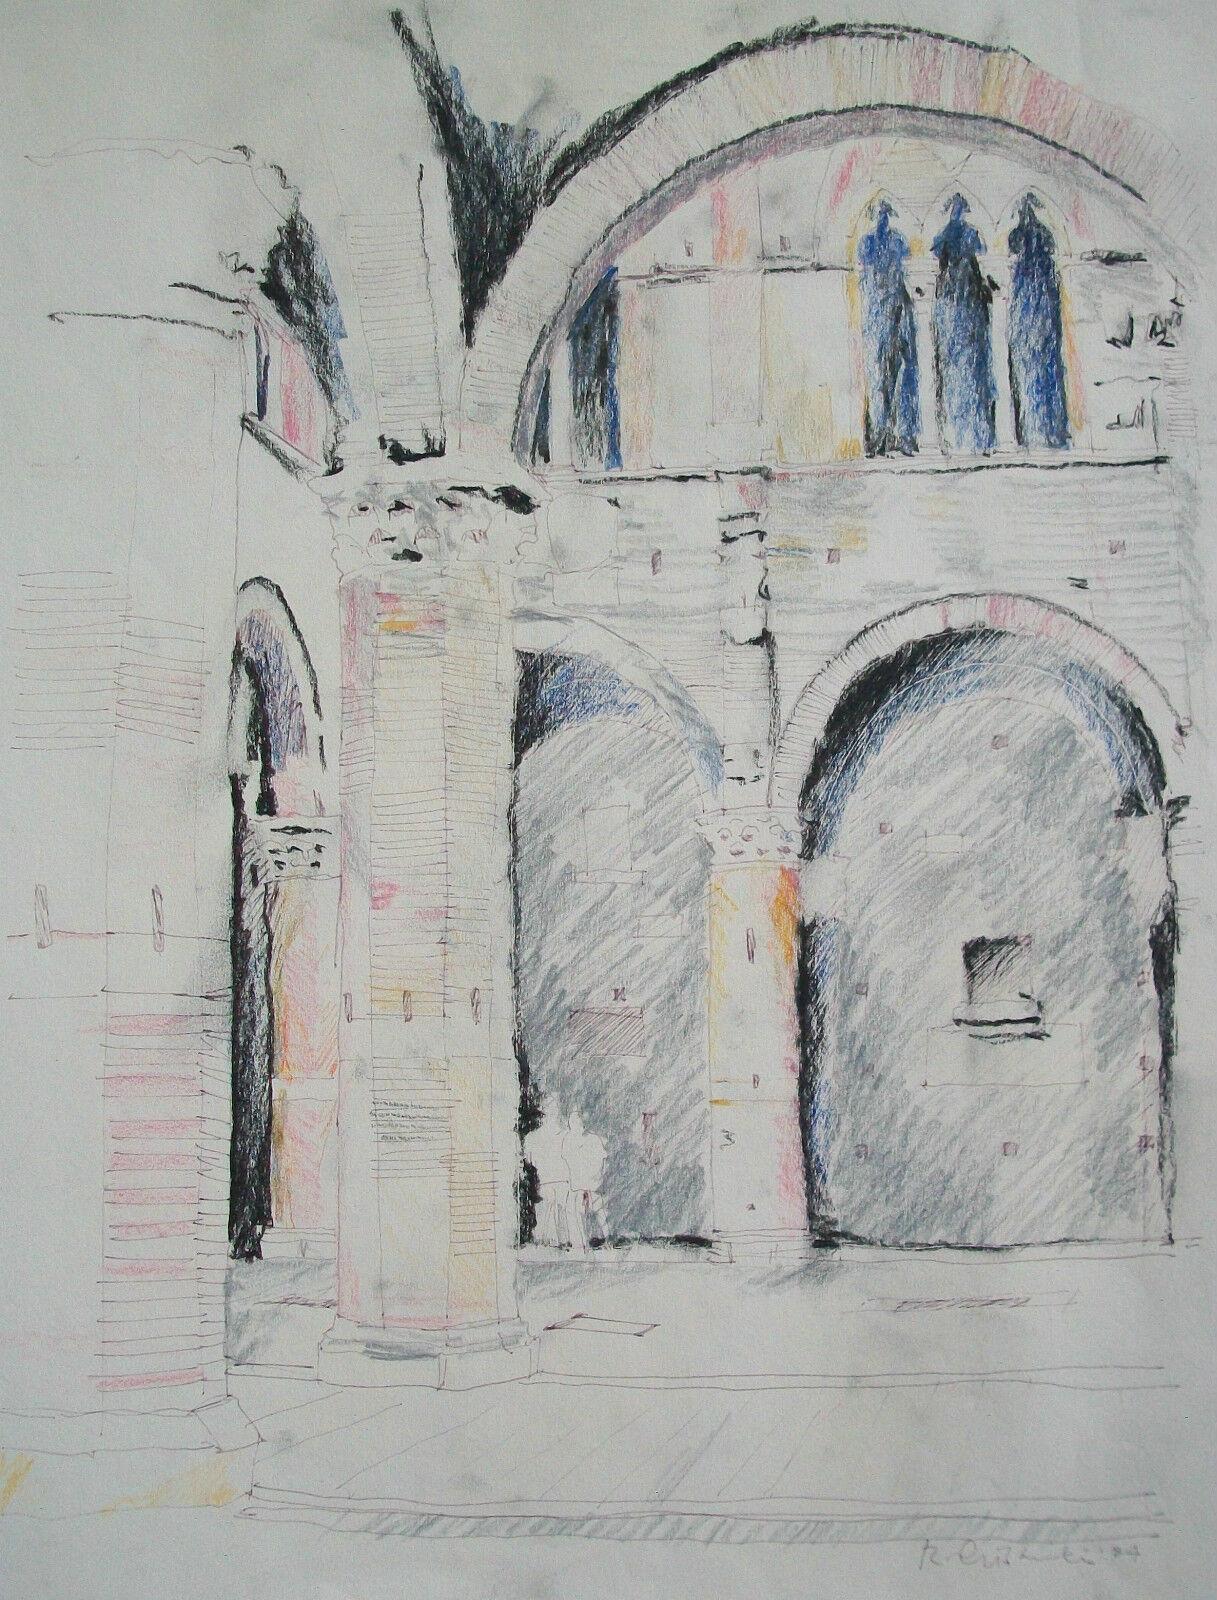 
Vintage Italian architectural mixed media drawing on paper - indistinctly signed & dated lower right - unframed - Italy - circa 1984.

Good vintage condition - minor paper loss to bottom edge (as photographed) - no restoration - smudges as intended